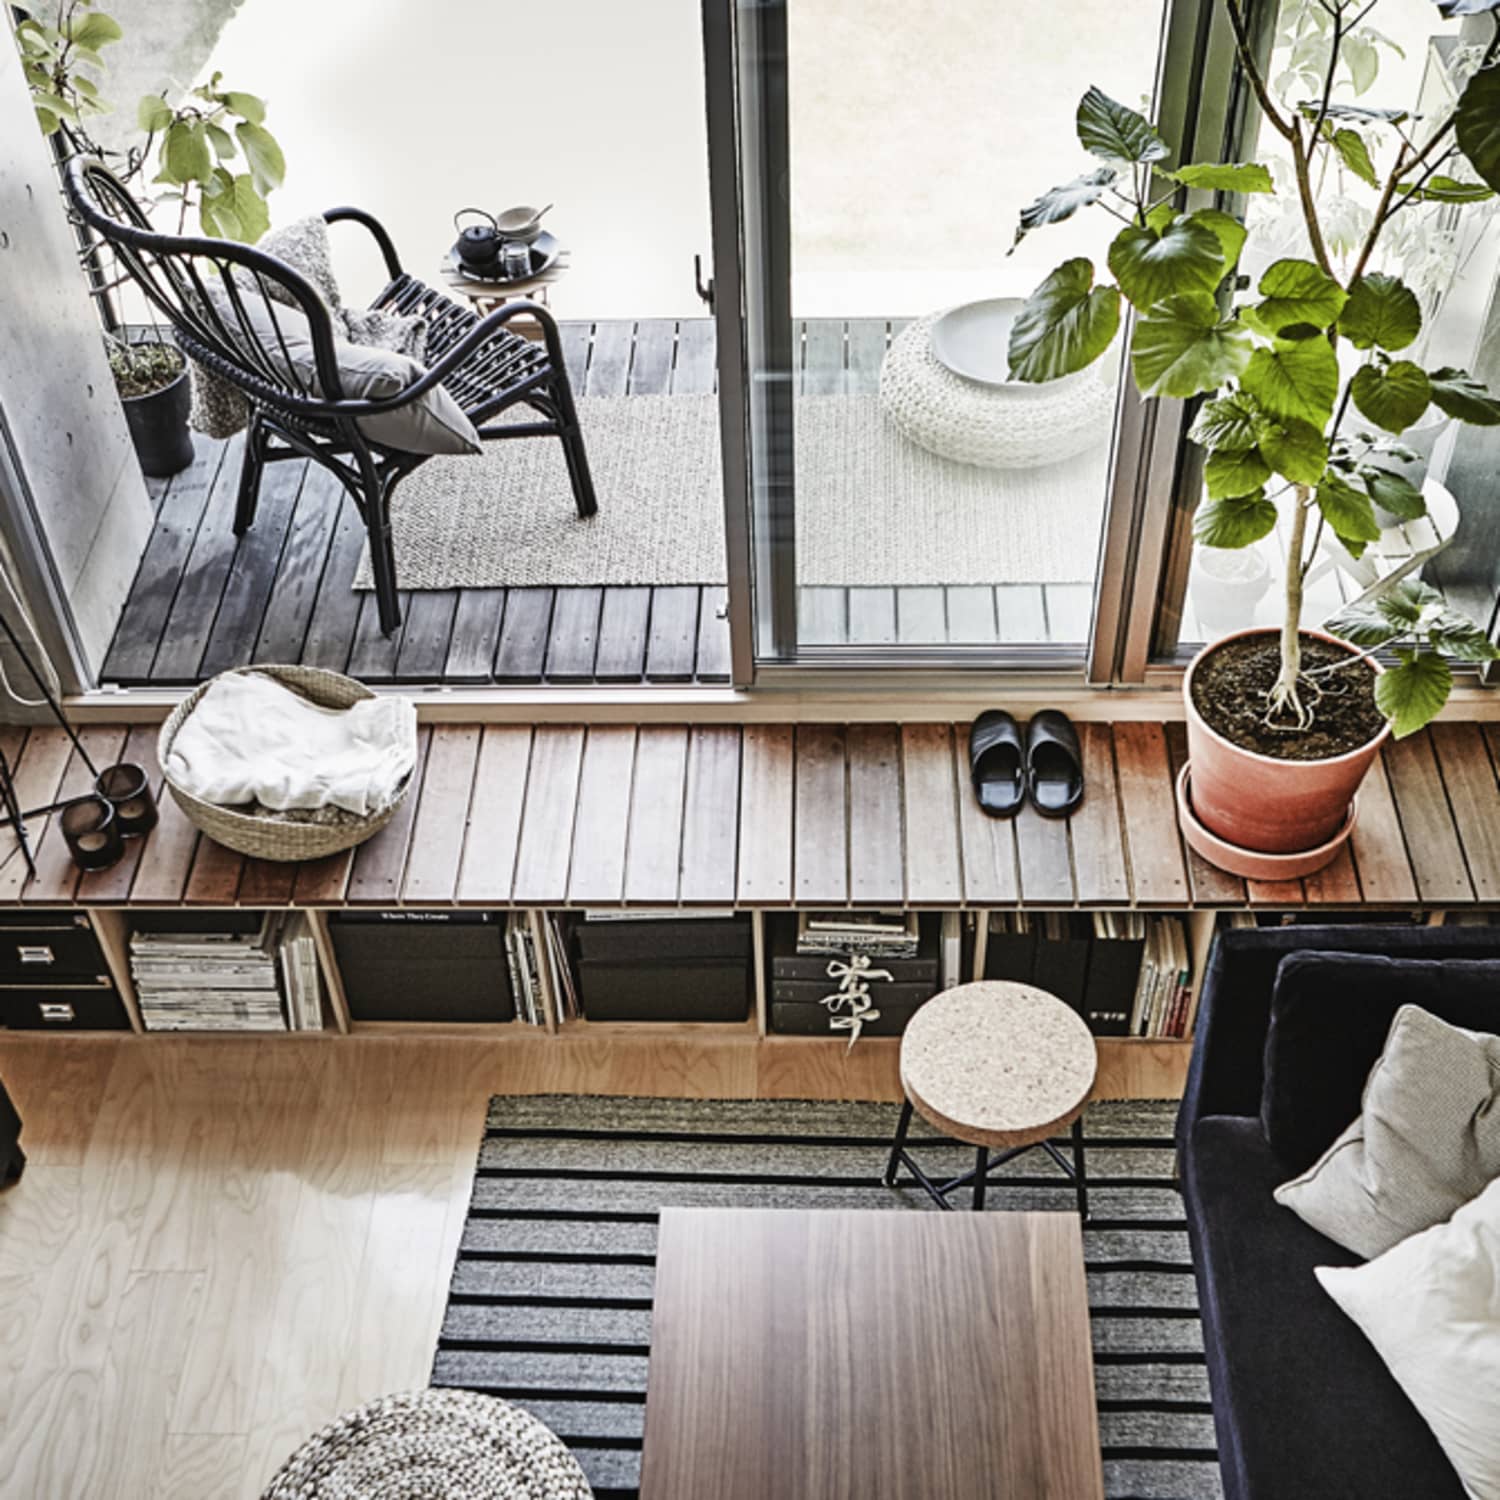 300-sqft Studio Apartment Layout Ideas with Plans and Tips